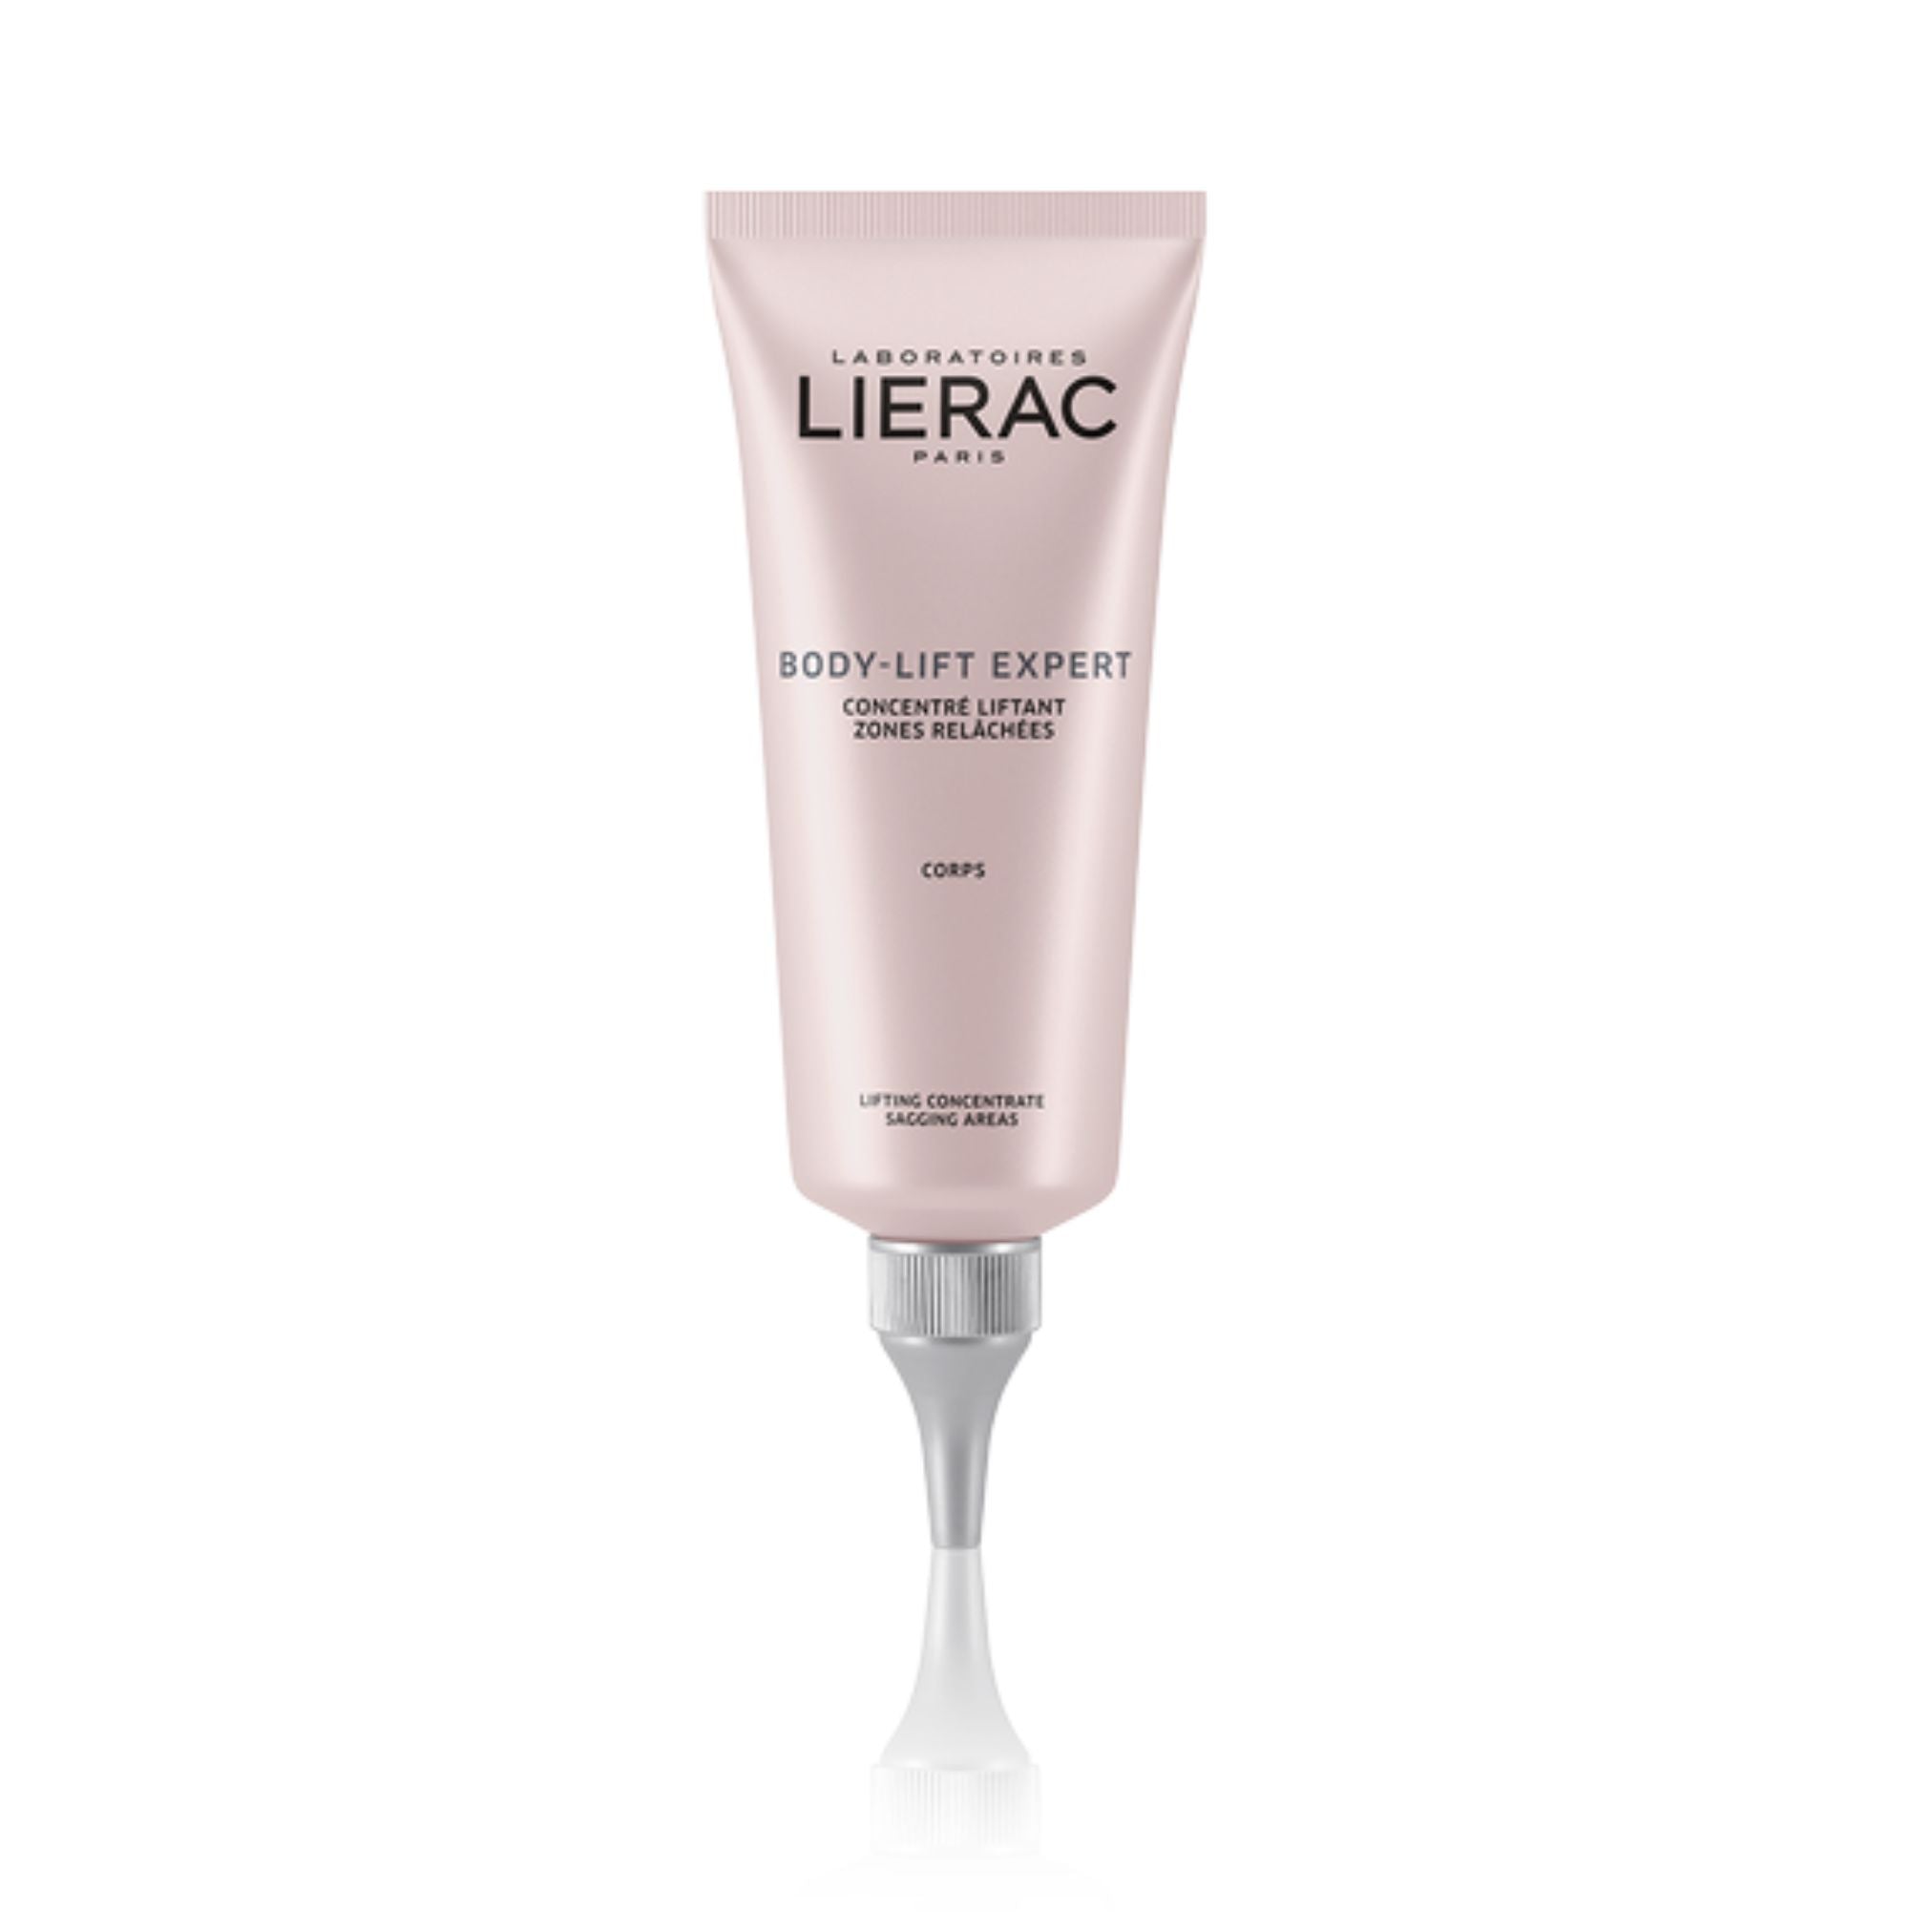 Lierac Body-Lift Expert Concentrate Lifting Relaxed Areas 100ml